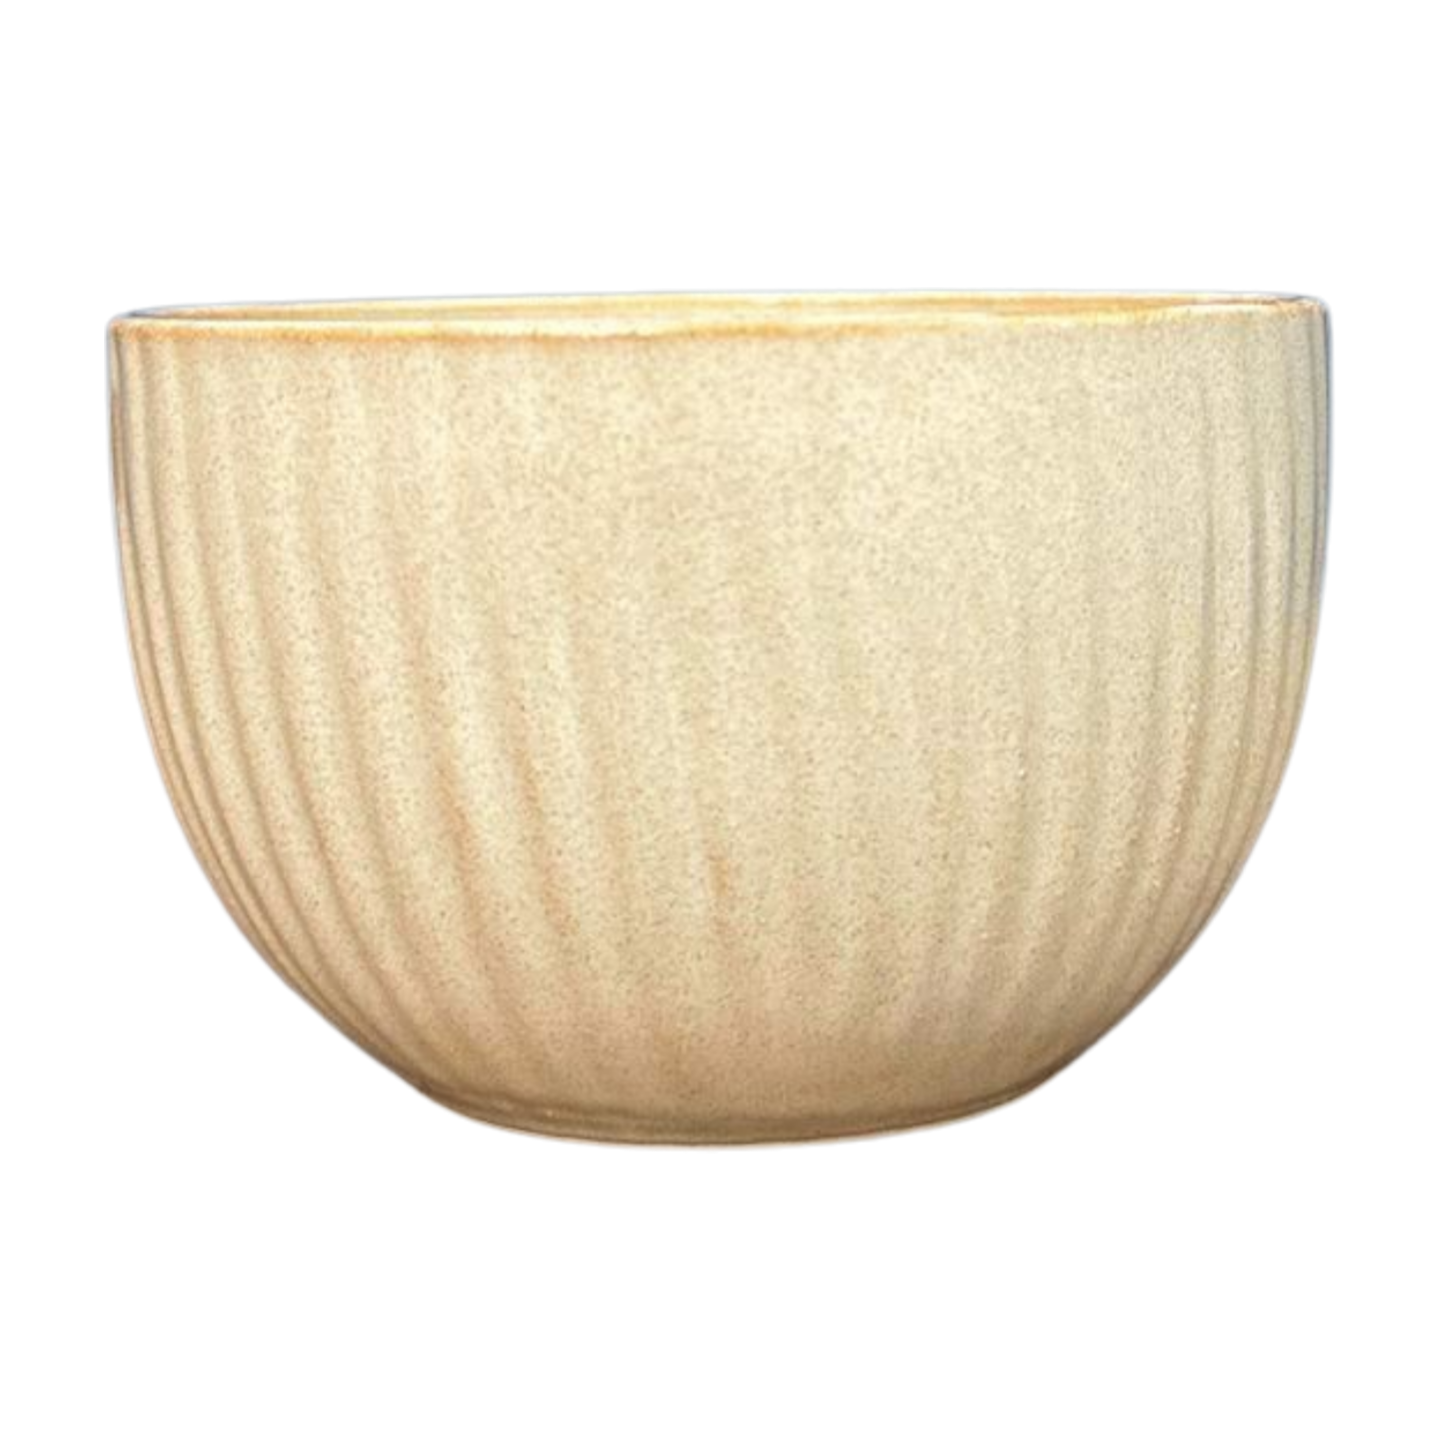 Japanese Rice Bowl in Ivory